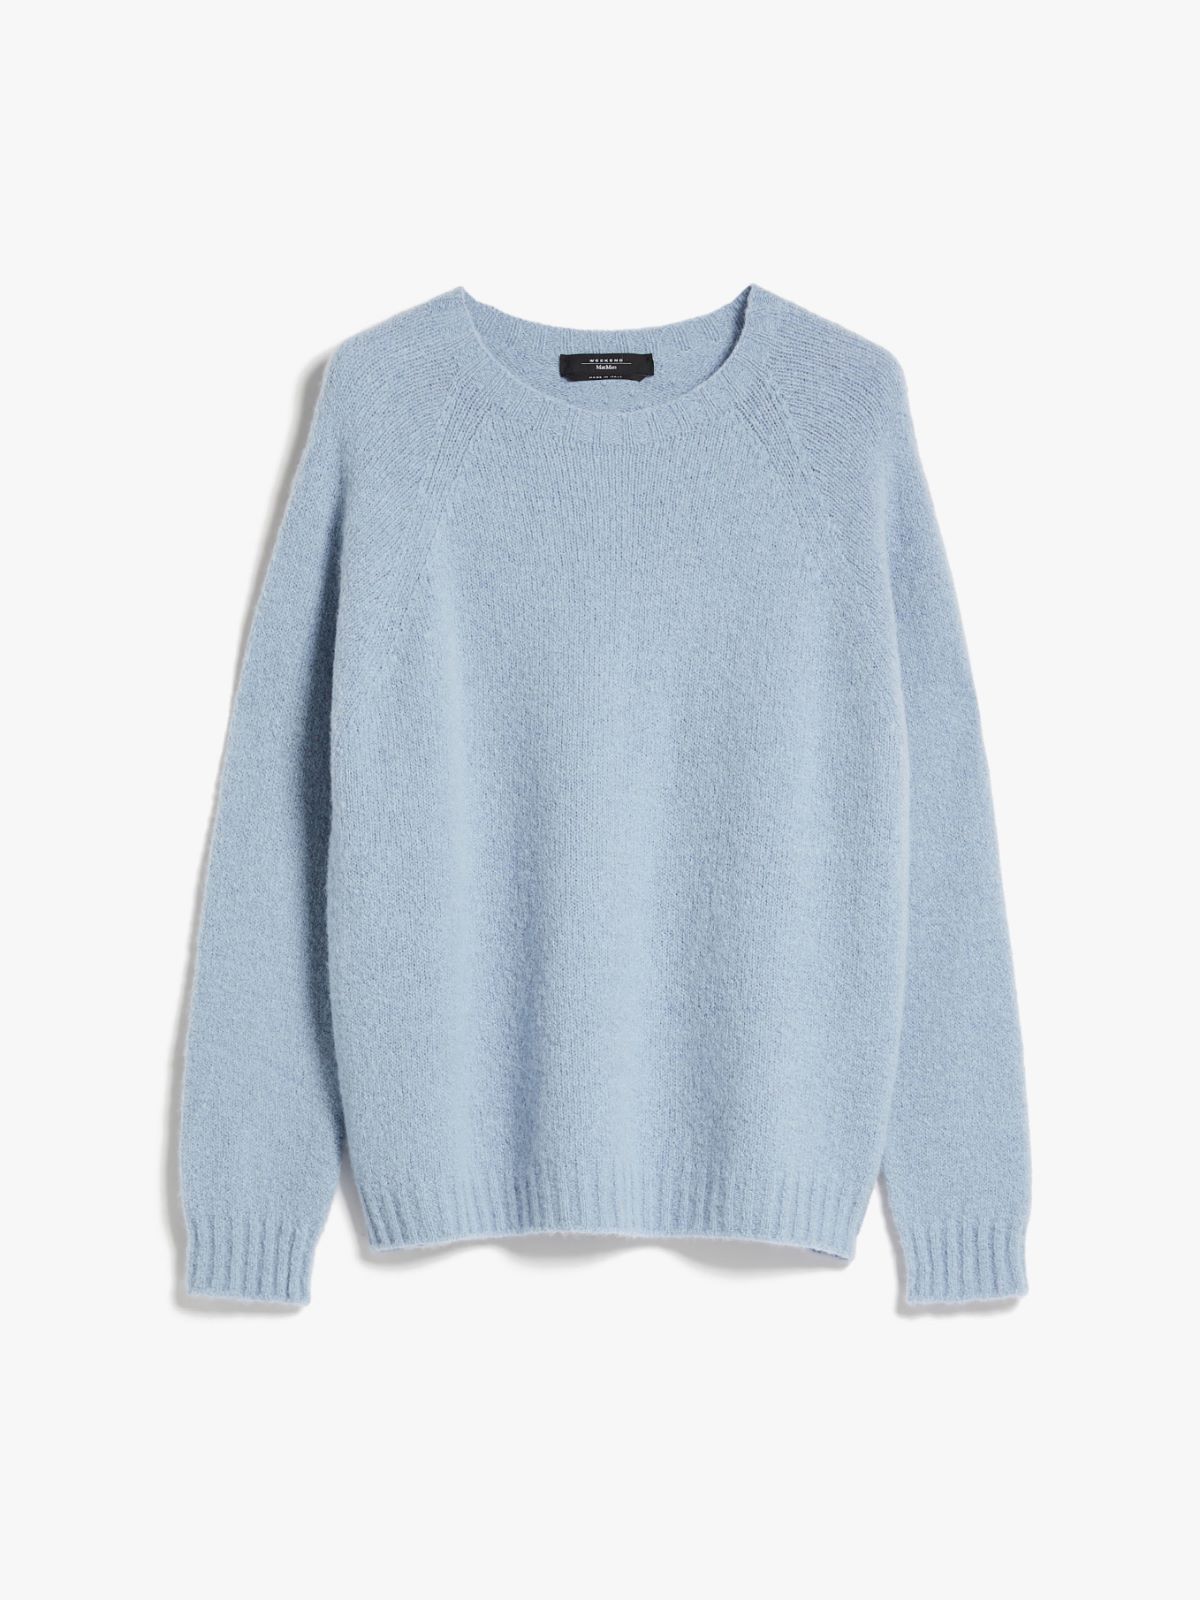 Soft knit top in alpaca and cotton, light blue | Weekend Max Mara